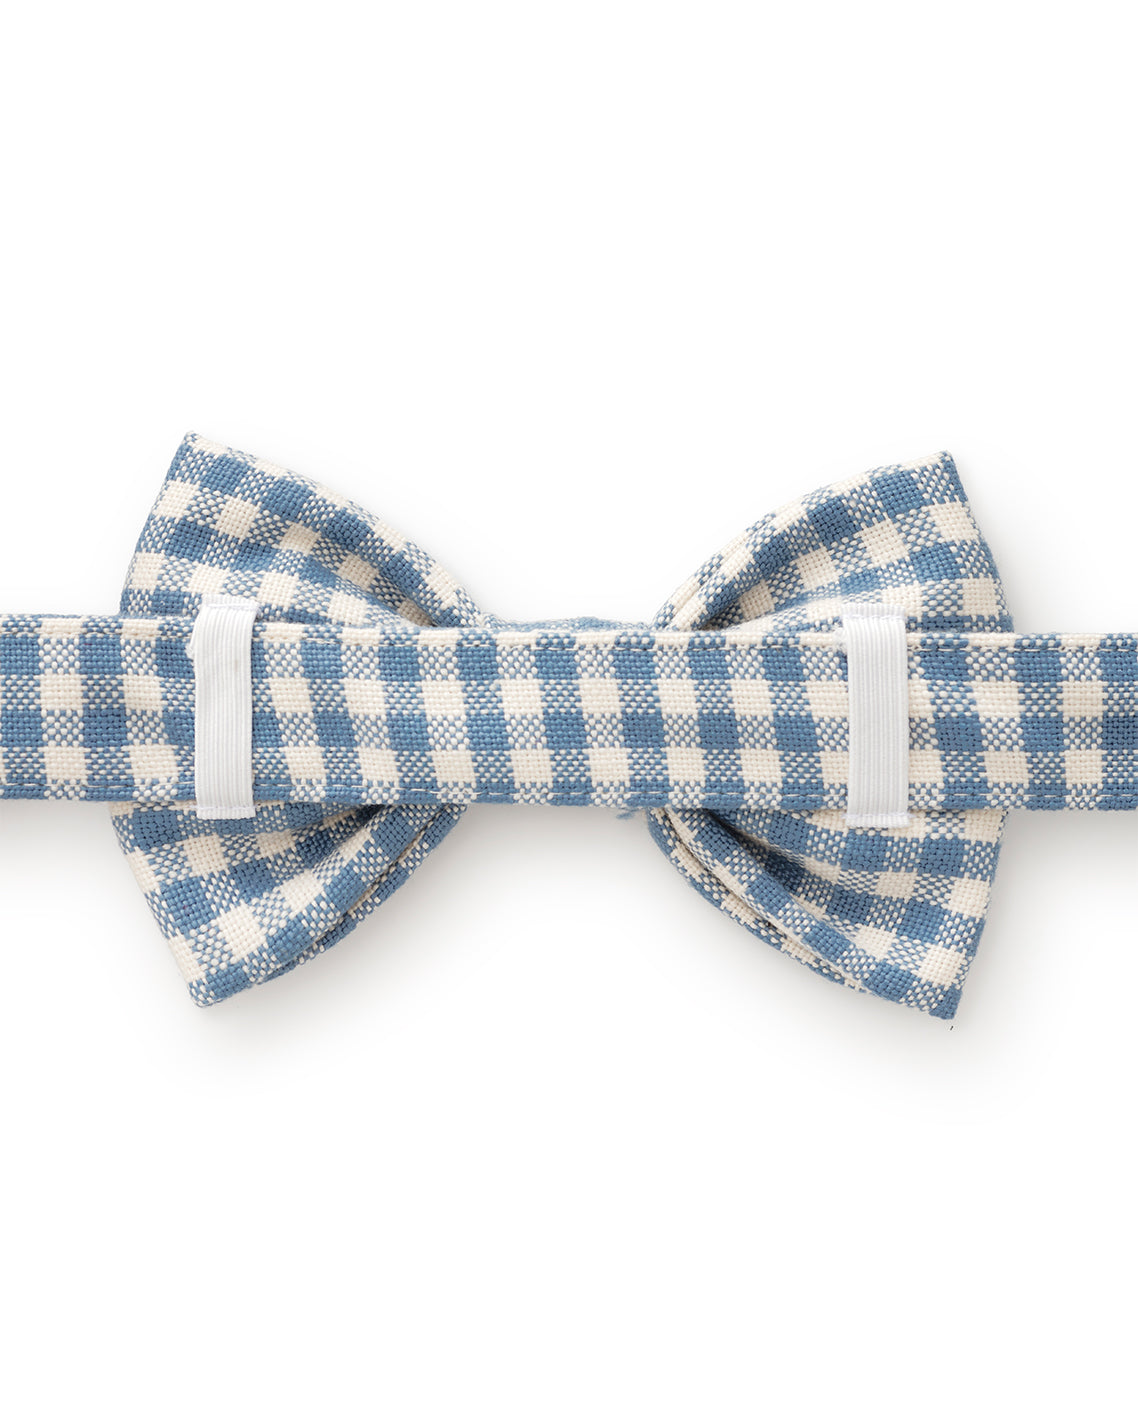 DJ x TFD Bow Tie in Blue Gingham